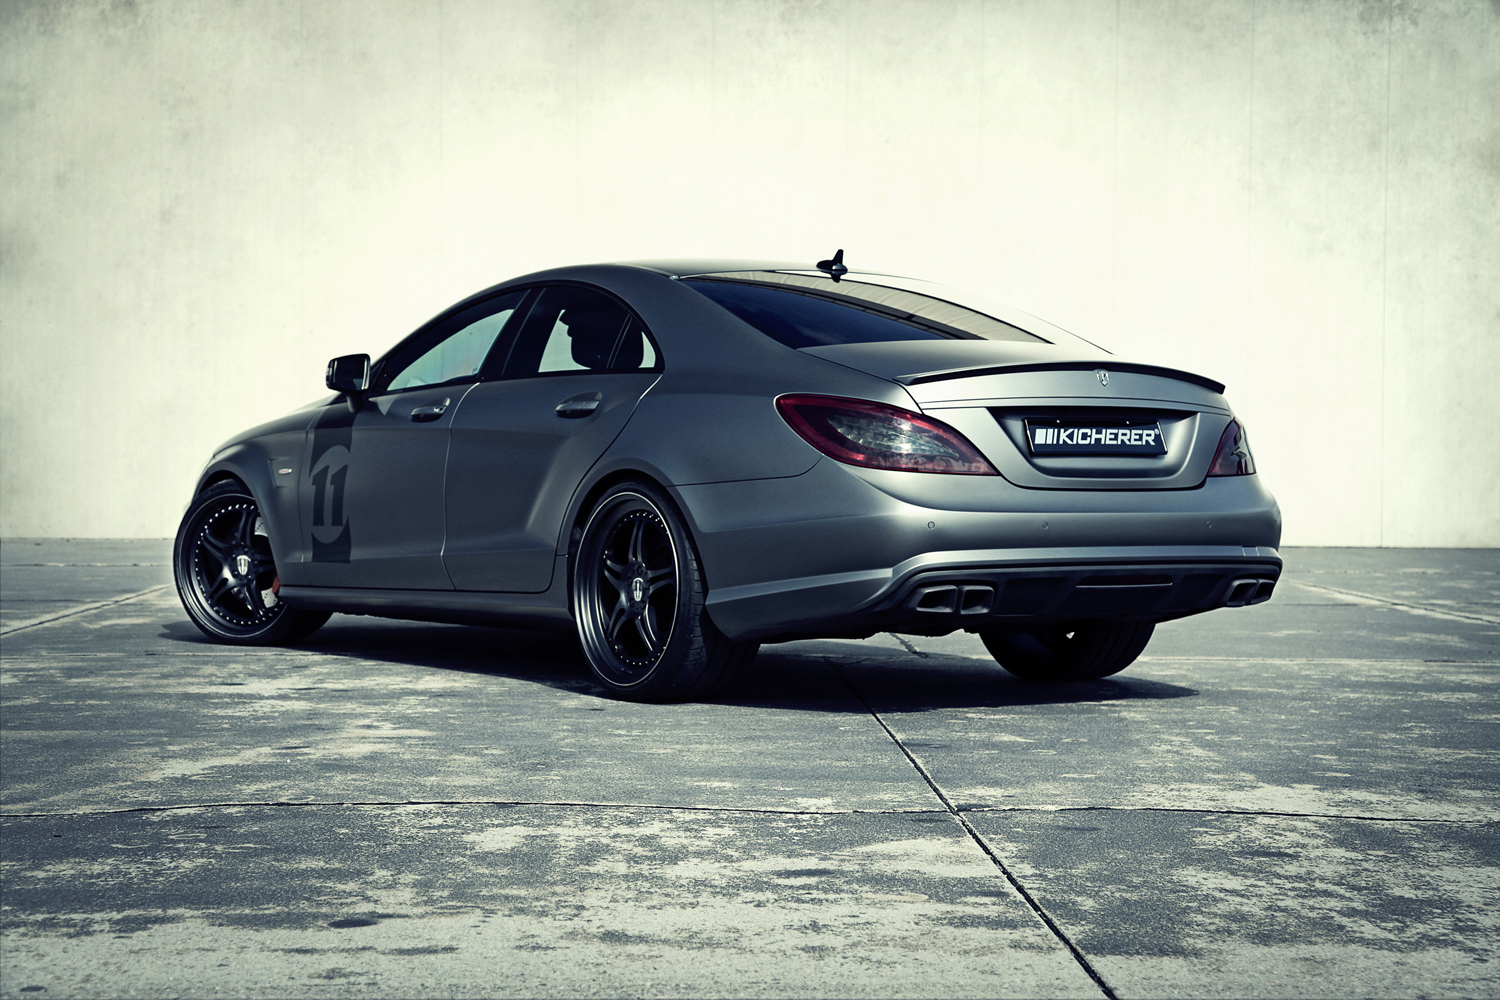 Kicherer Mercedes Cls 63 Amg Pics, Vehicles Collection